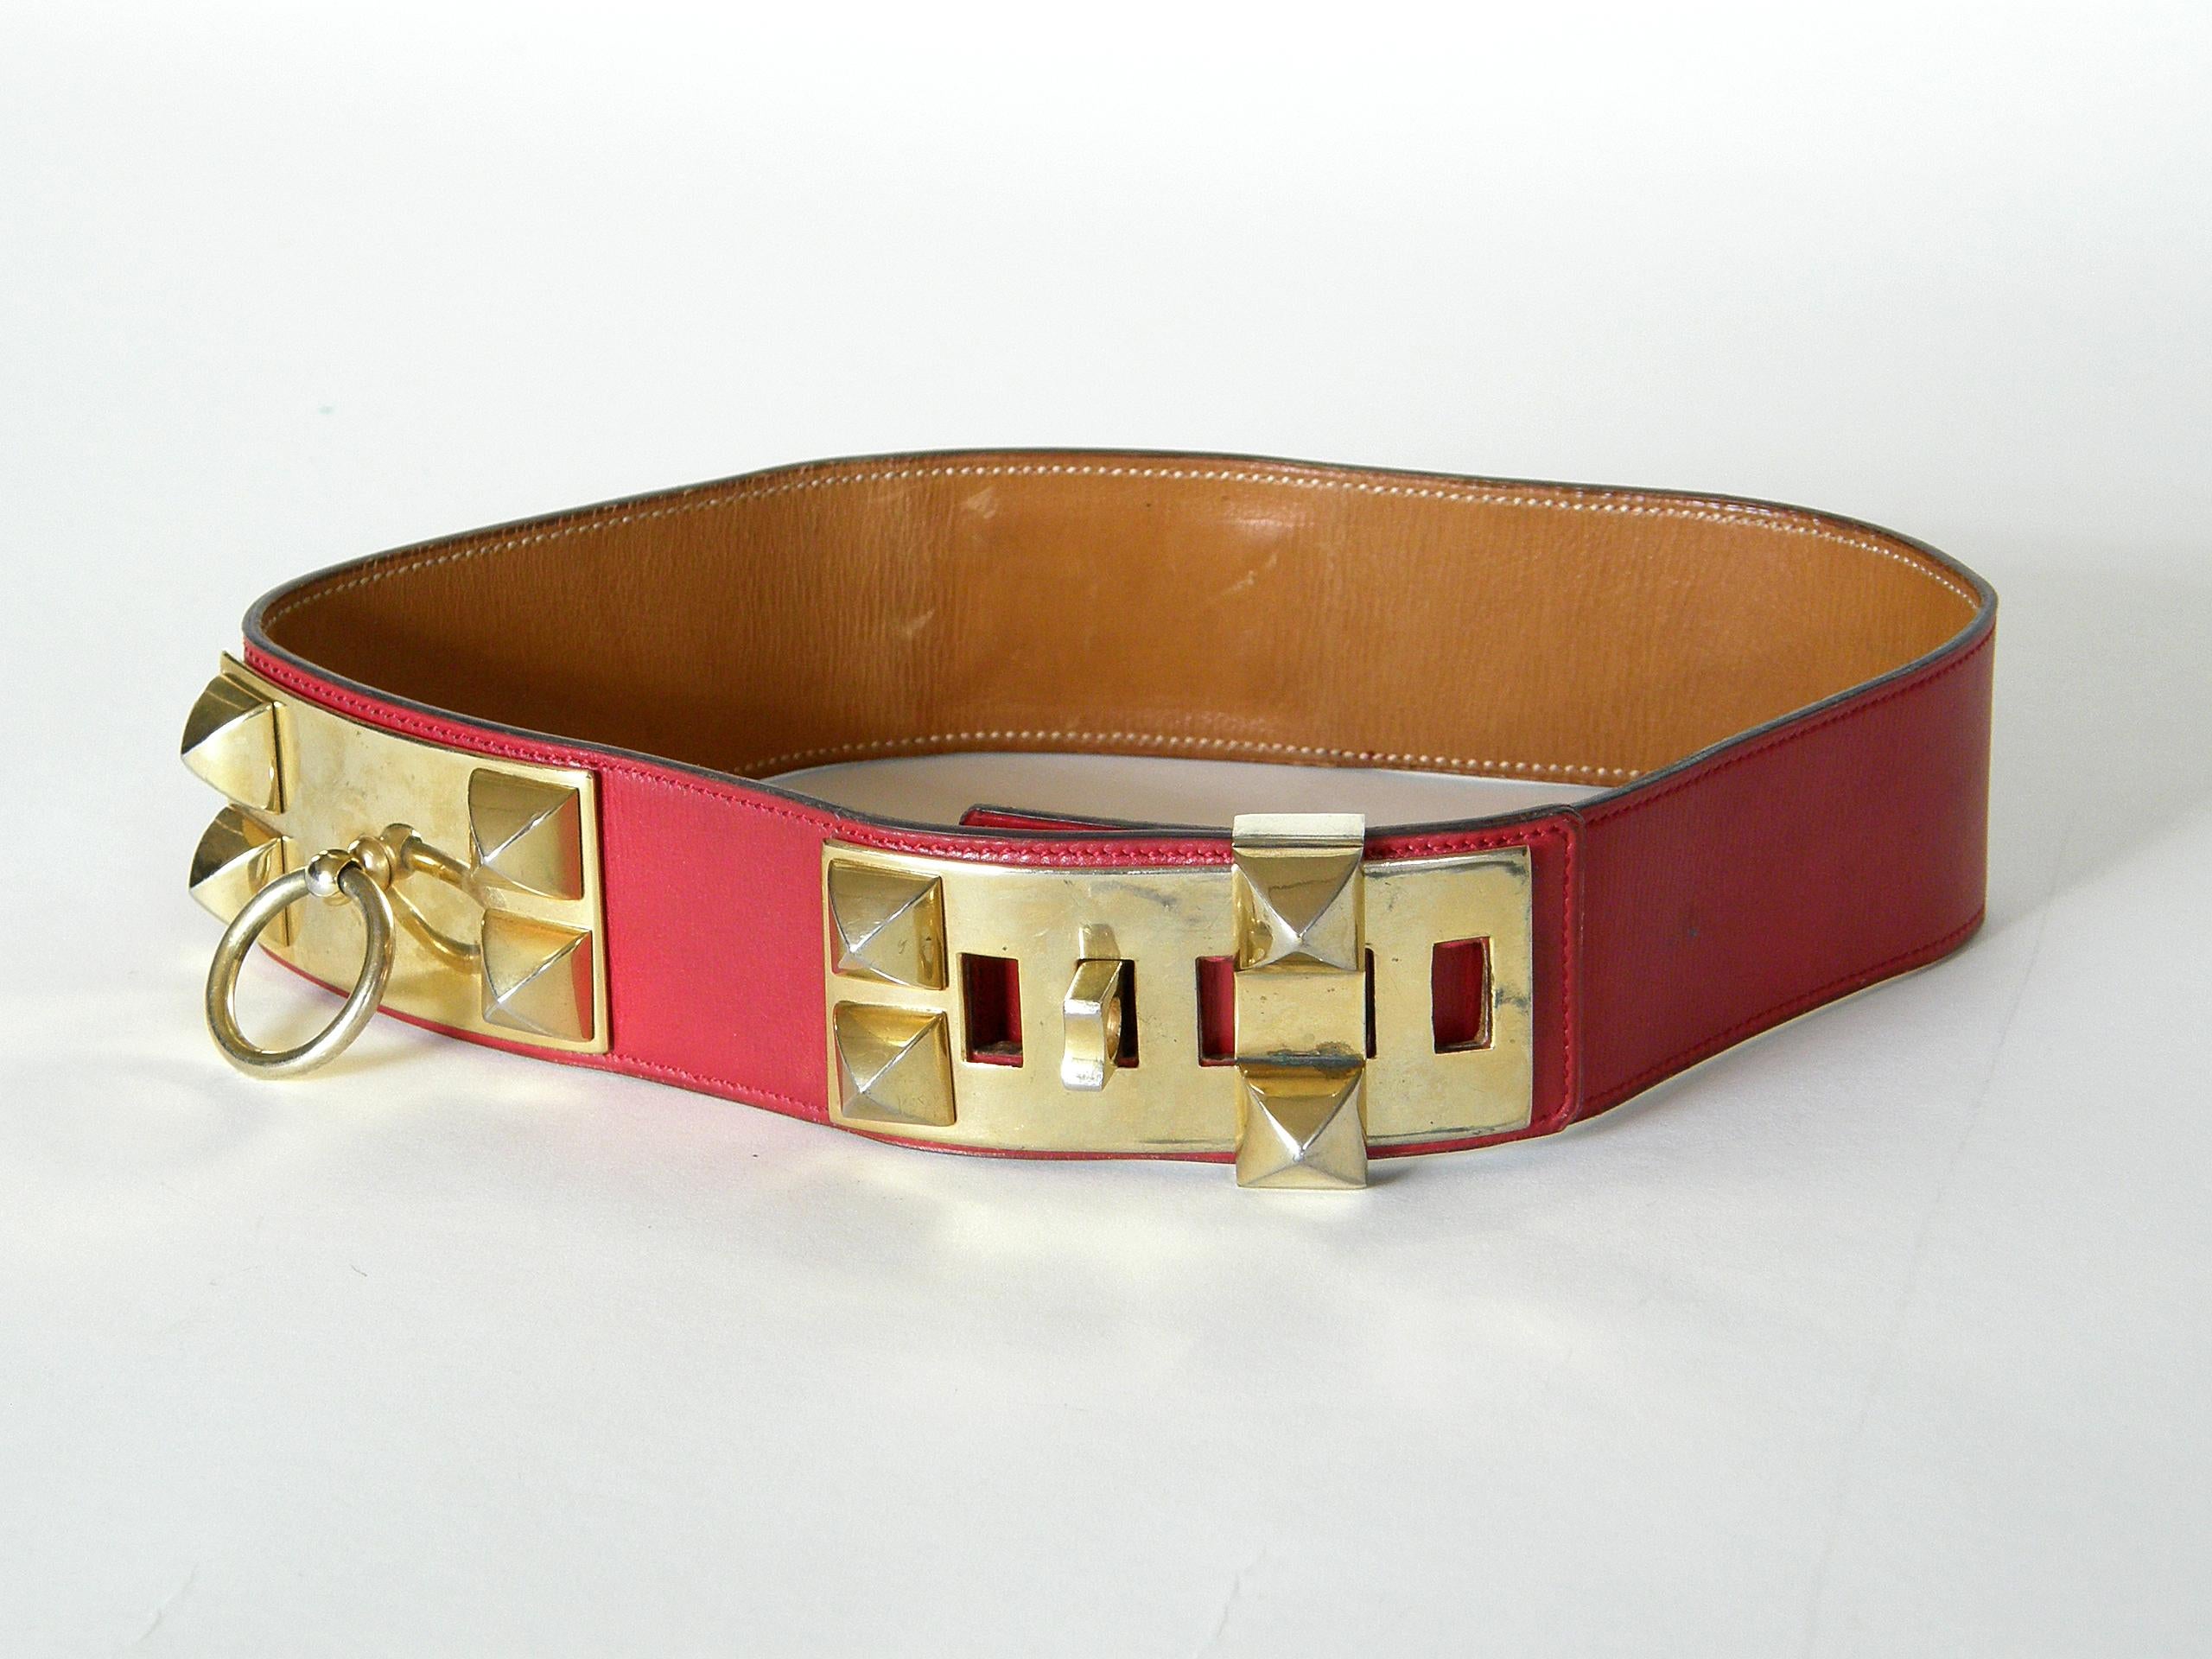 This iconic Hermès Collier de Chien belt is made of lipstick red leather with gold plated hardware. This classic design was adapted from a custom designed dog collar made for a private client of Hermès in 1923. Due to the popularity of the design,